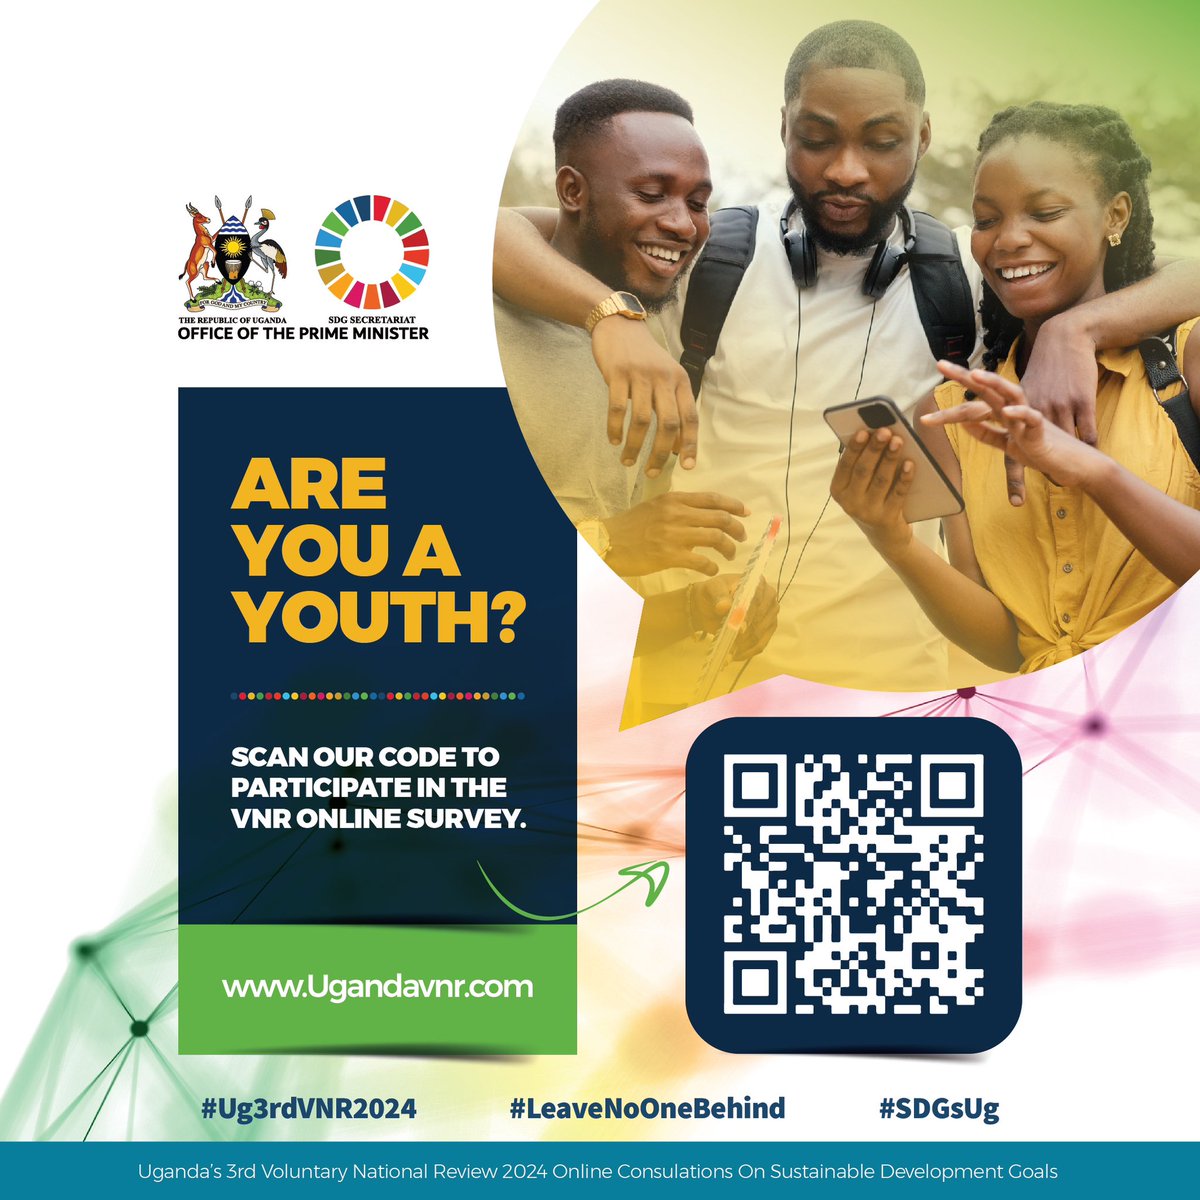 Stakeholders/institutions involved or focused on include;

1. Youth &Children: Provided with the necessary skills and opportunities needed to reach their potential, young people can be a driving force for supporting development & contributing to peace and security.

#Ug3rdVNR2024